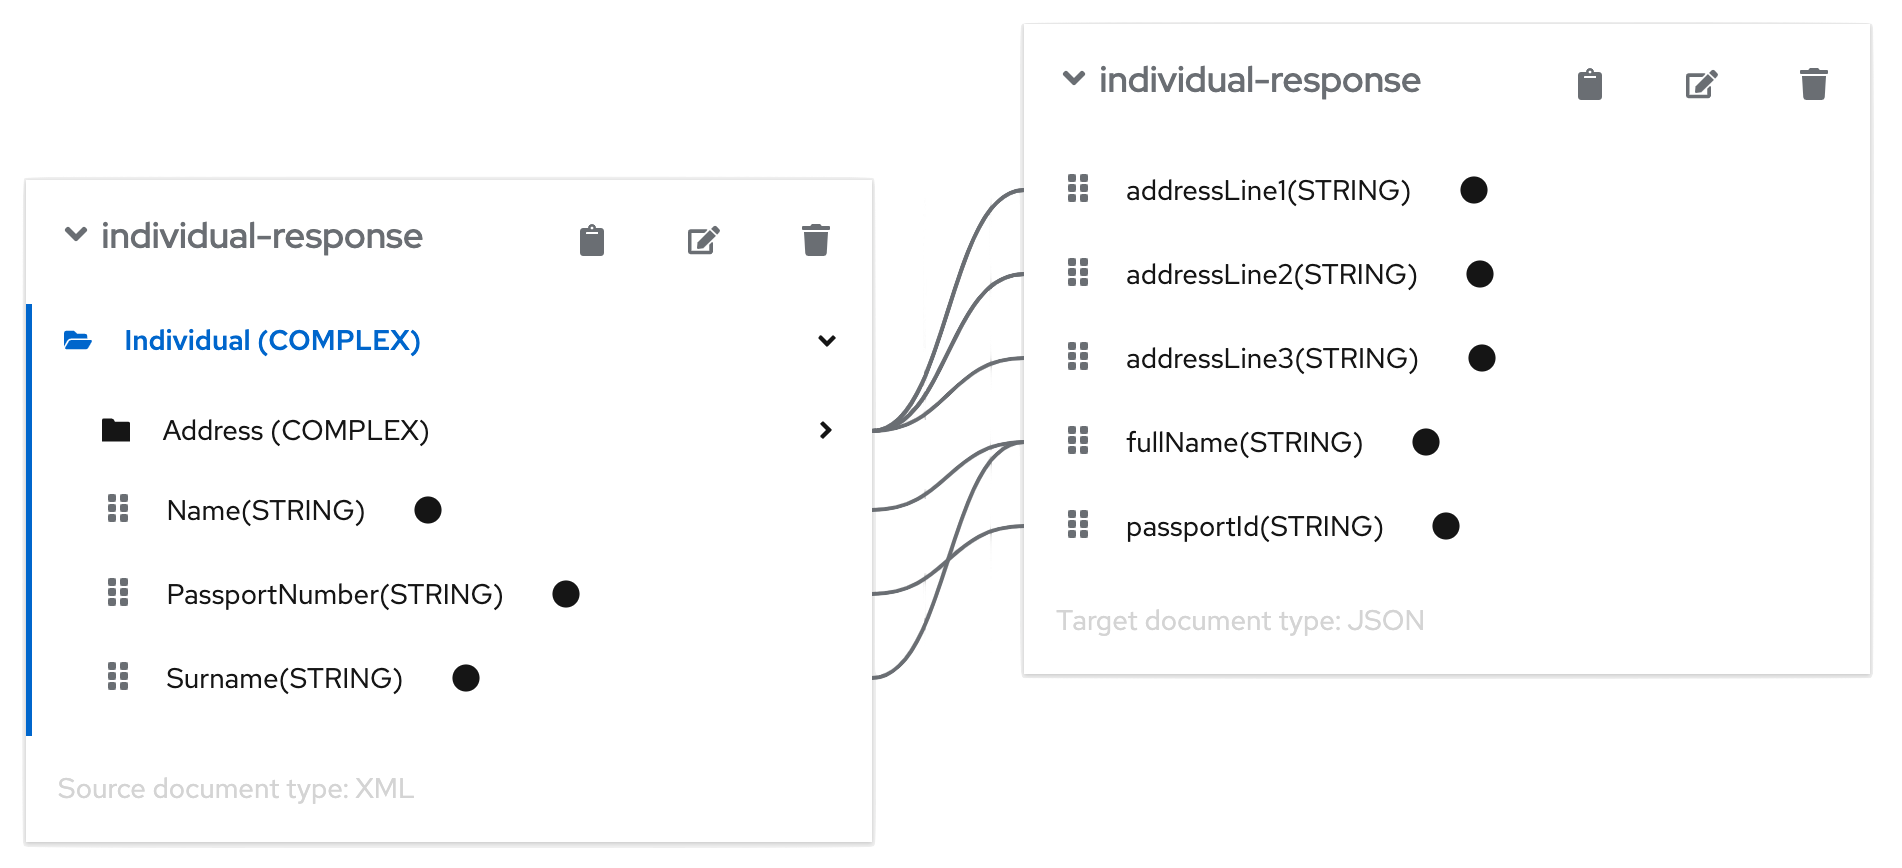 Mapping definition for the response flow